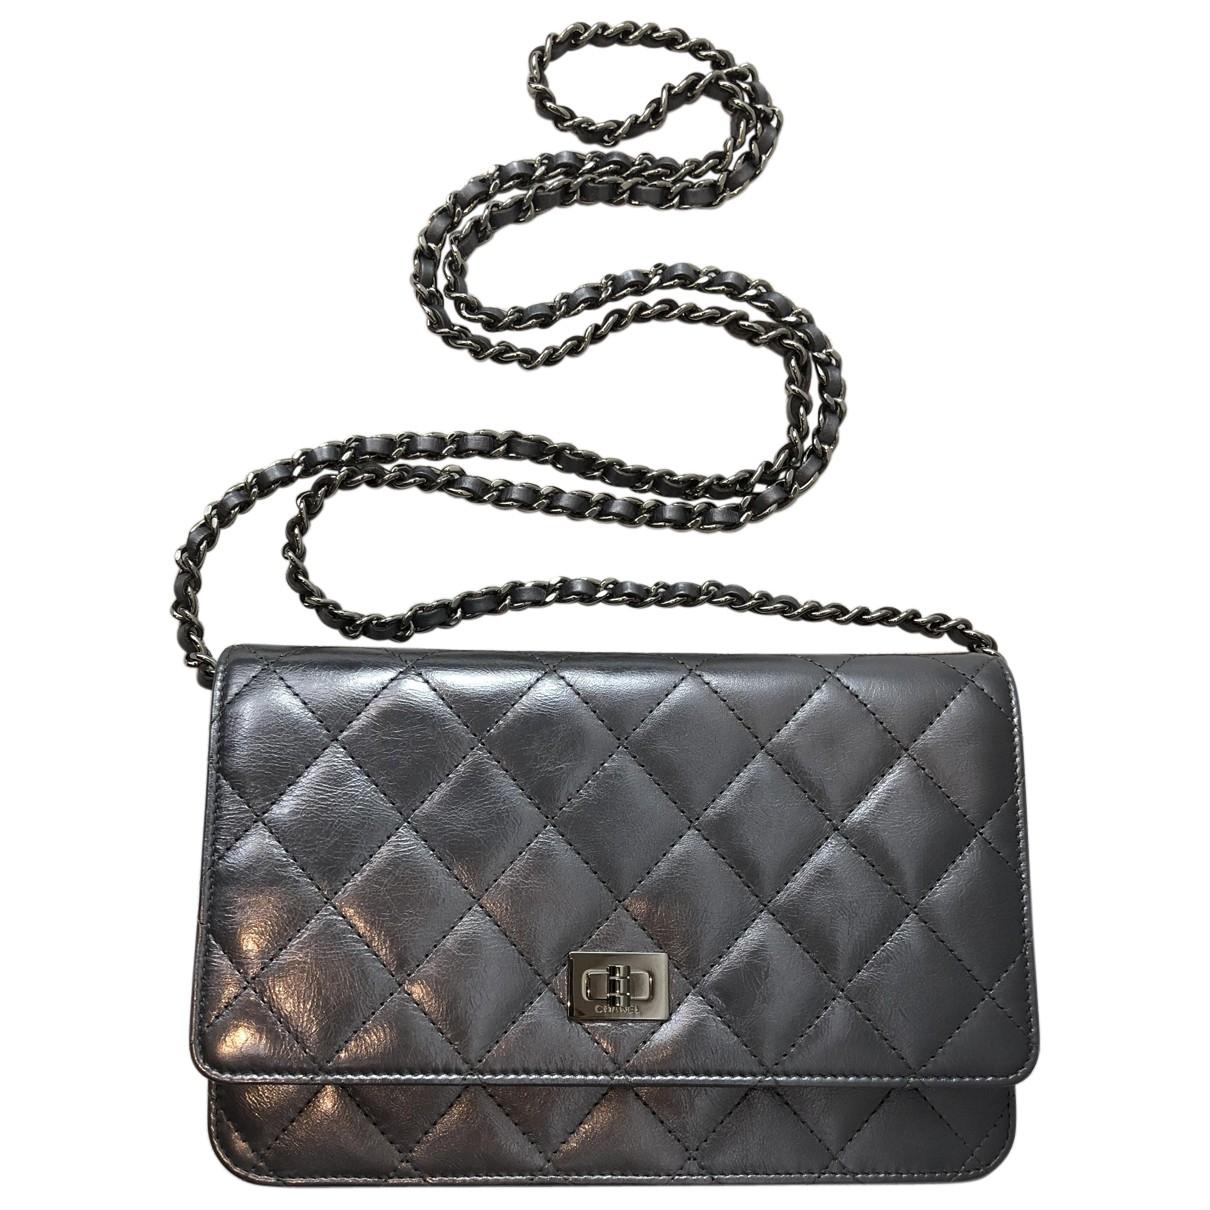 Lyst - Chanel Pre-owned Wallet On Chain Silver Leather Handbags in Metallic